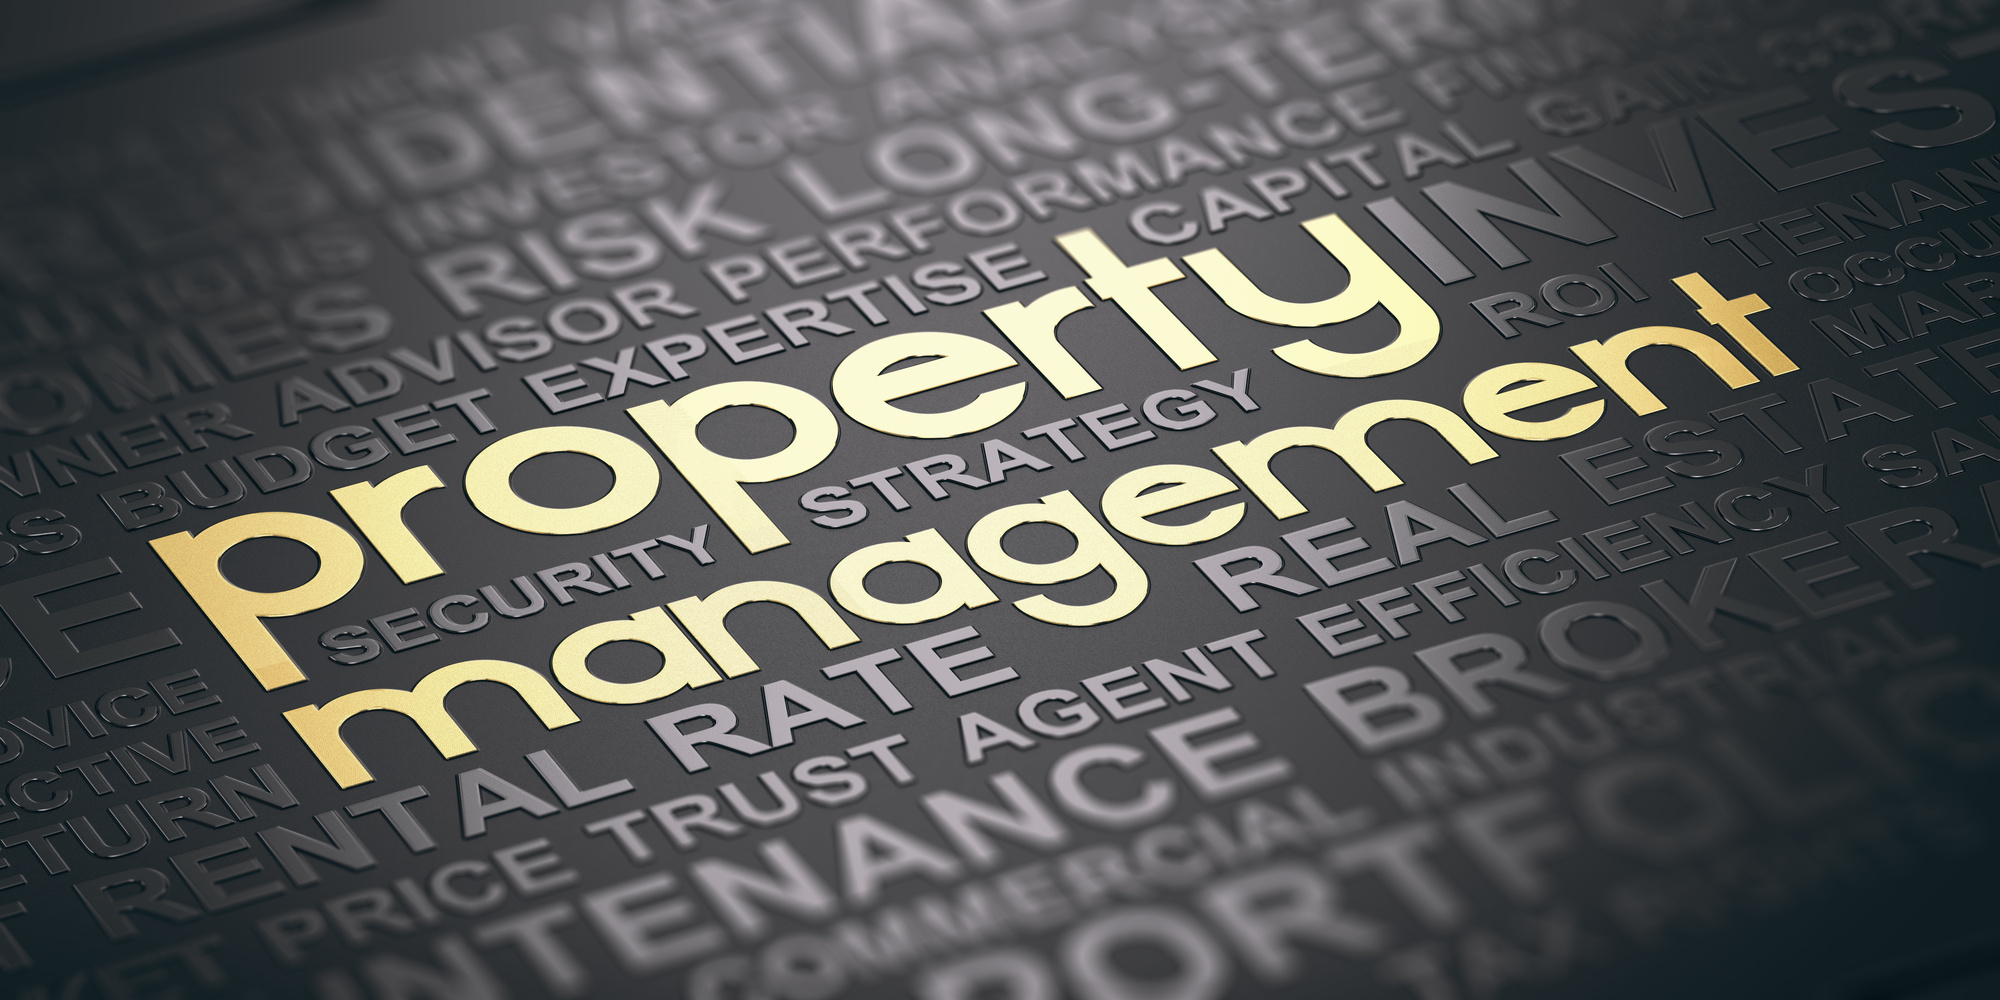 Are you on the hunt for the best property management company in your area? This is how to choose the best service for your needs.